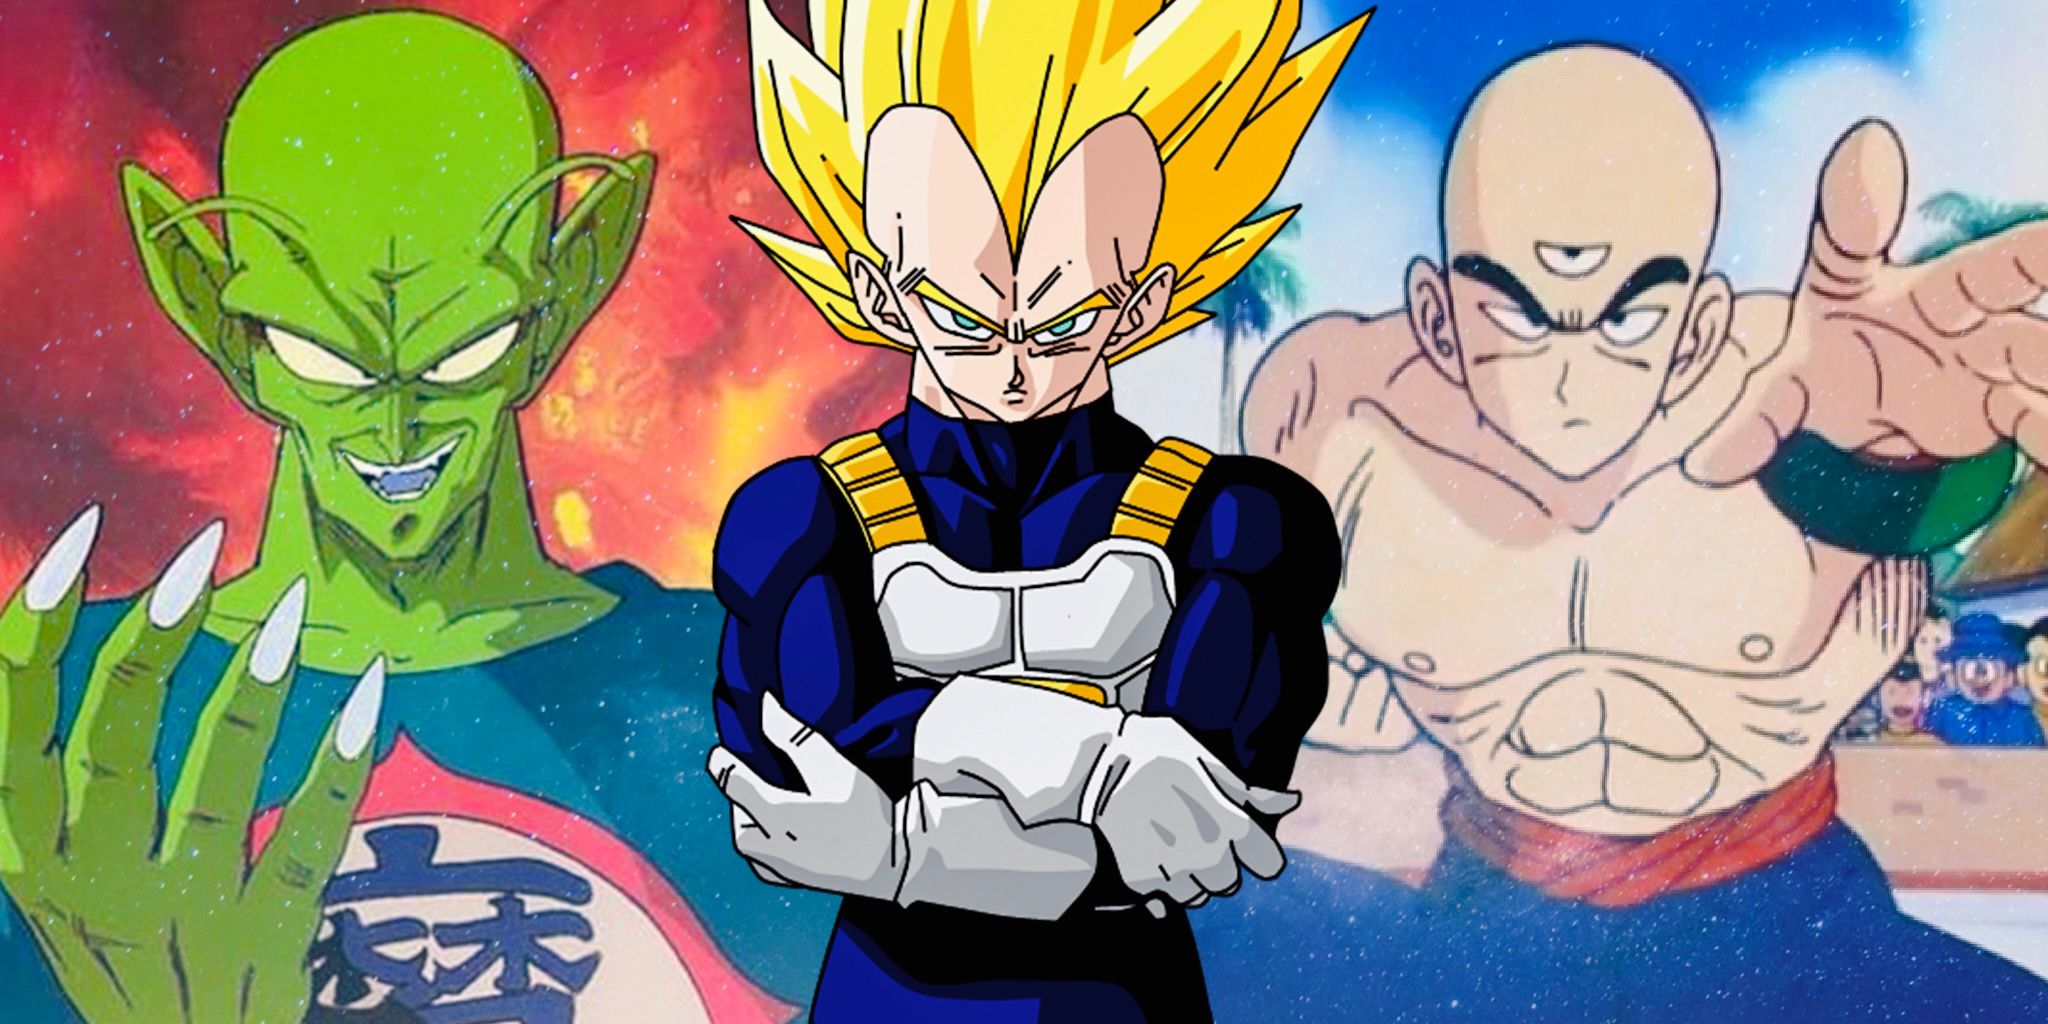 Super Saiyan Vegeta stands with King Piccolo and Tien in Dragon Ball and DBZ